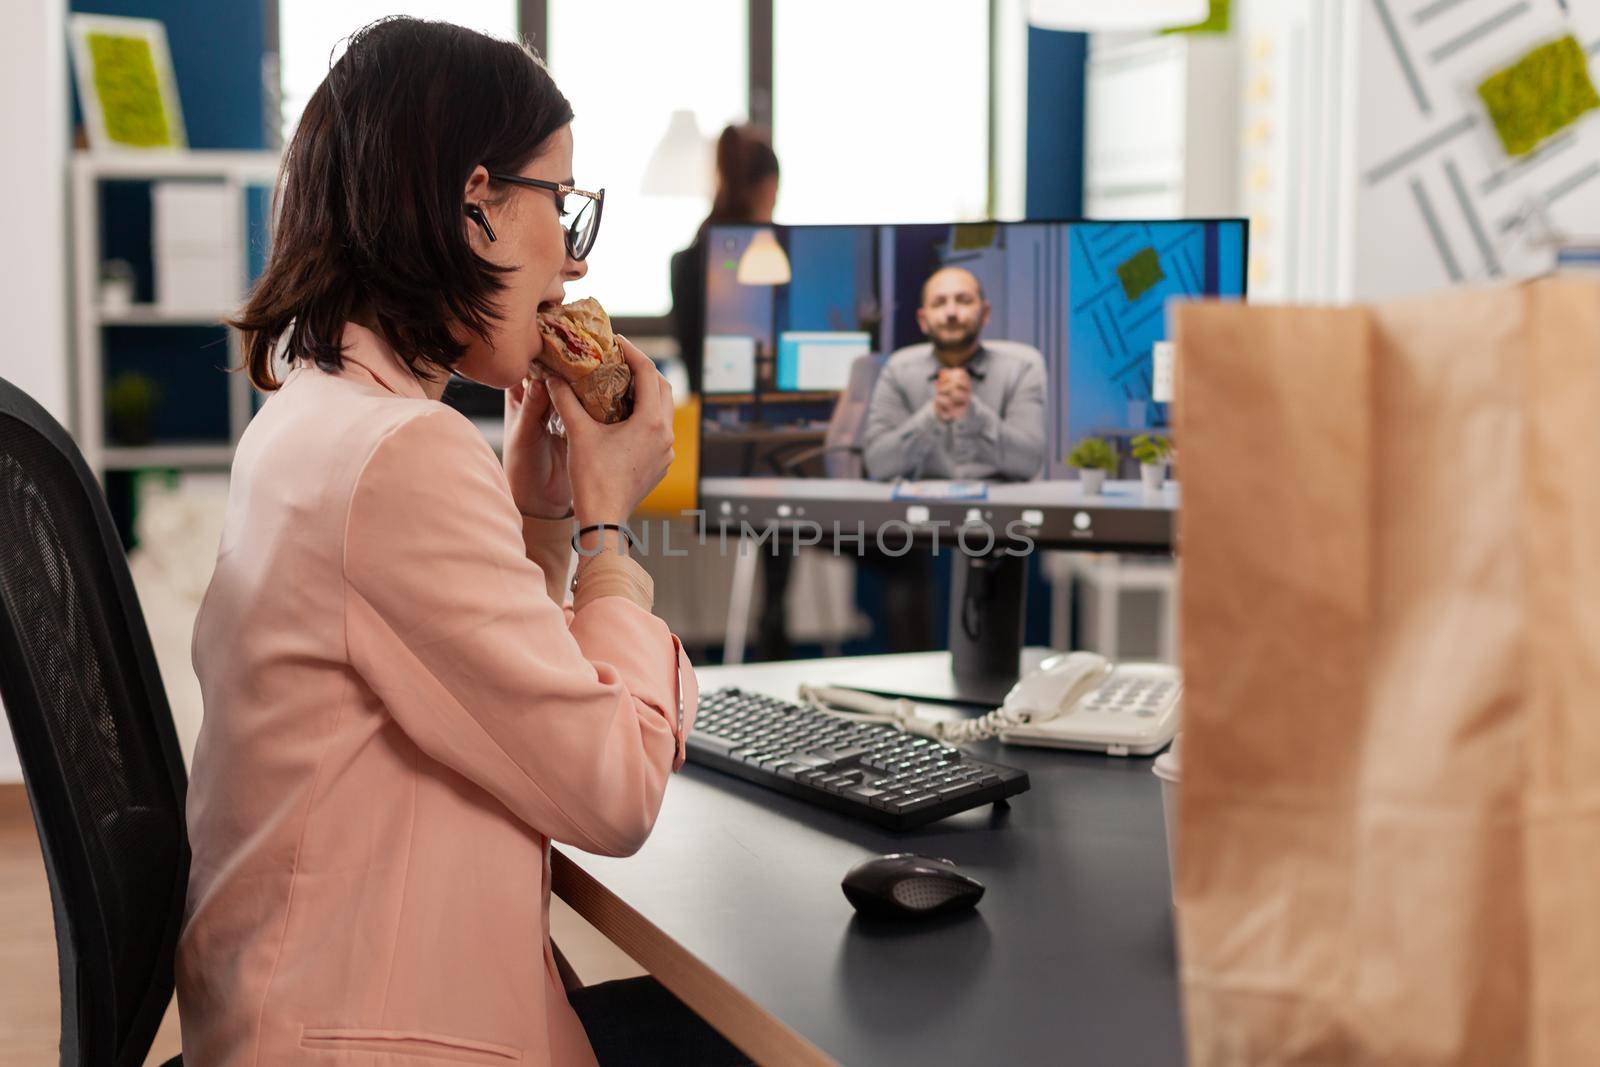 Businesswoman eating delivery takeaway sandwich during online videocall conference by DCStudio